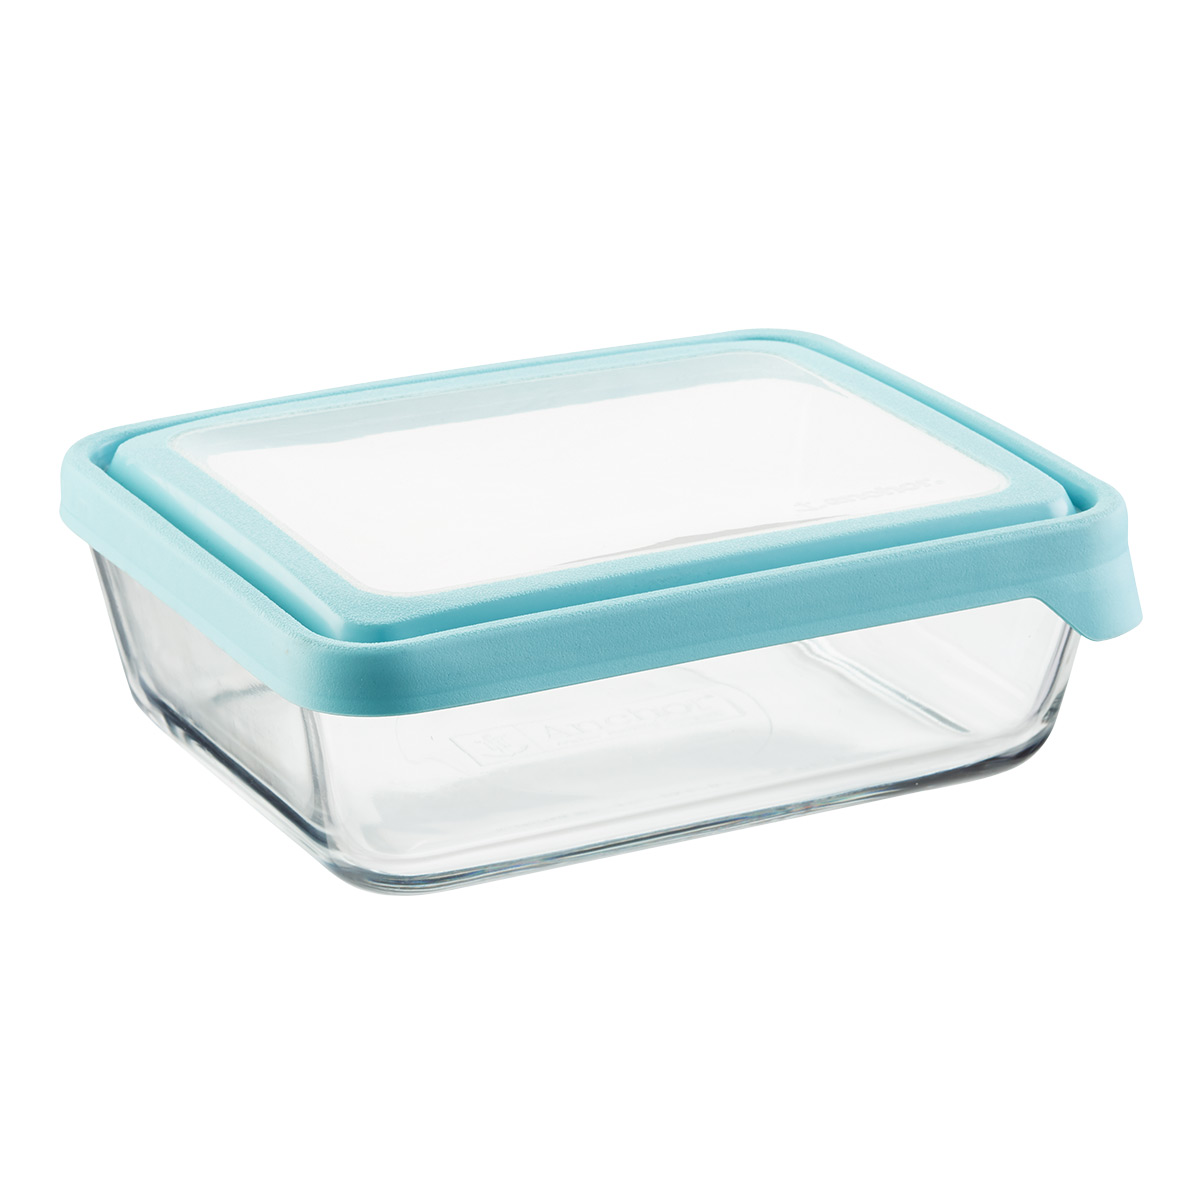 https://www.containerstore.com/catalogimages/351283/10076233-anchor-trueseal-container-r.jpg